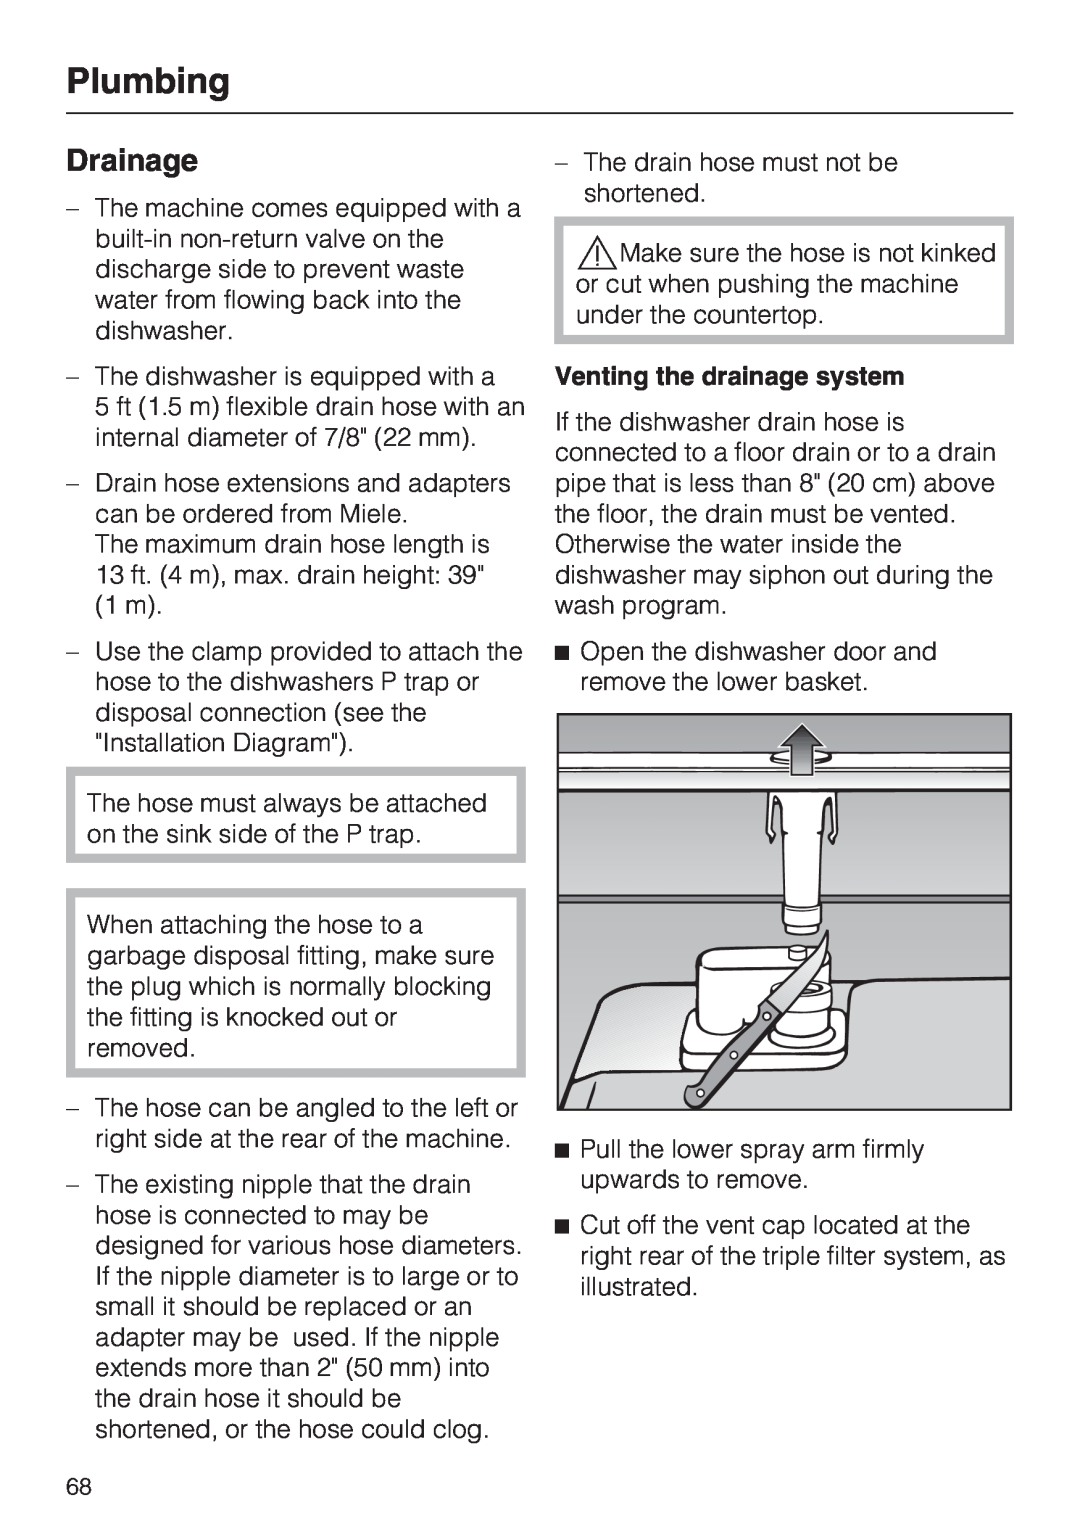 Miele G 5705, G 5700 operating instructions Drainage, Plumbing, Venting the drainage system 